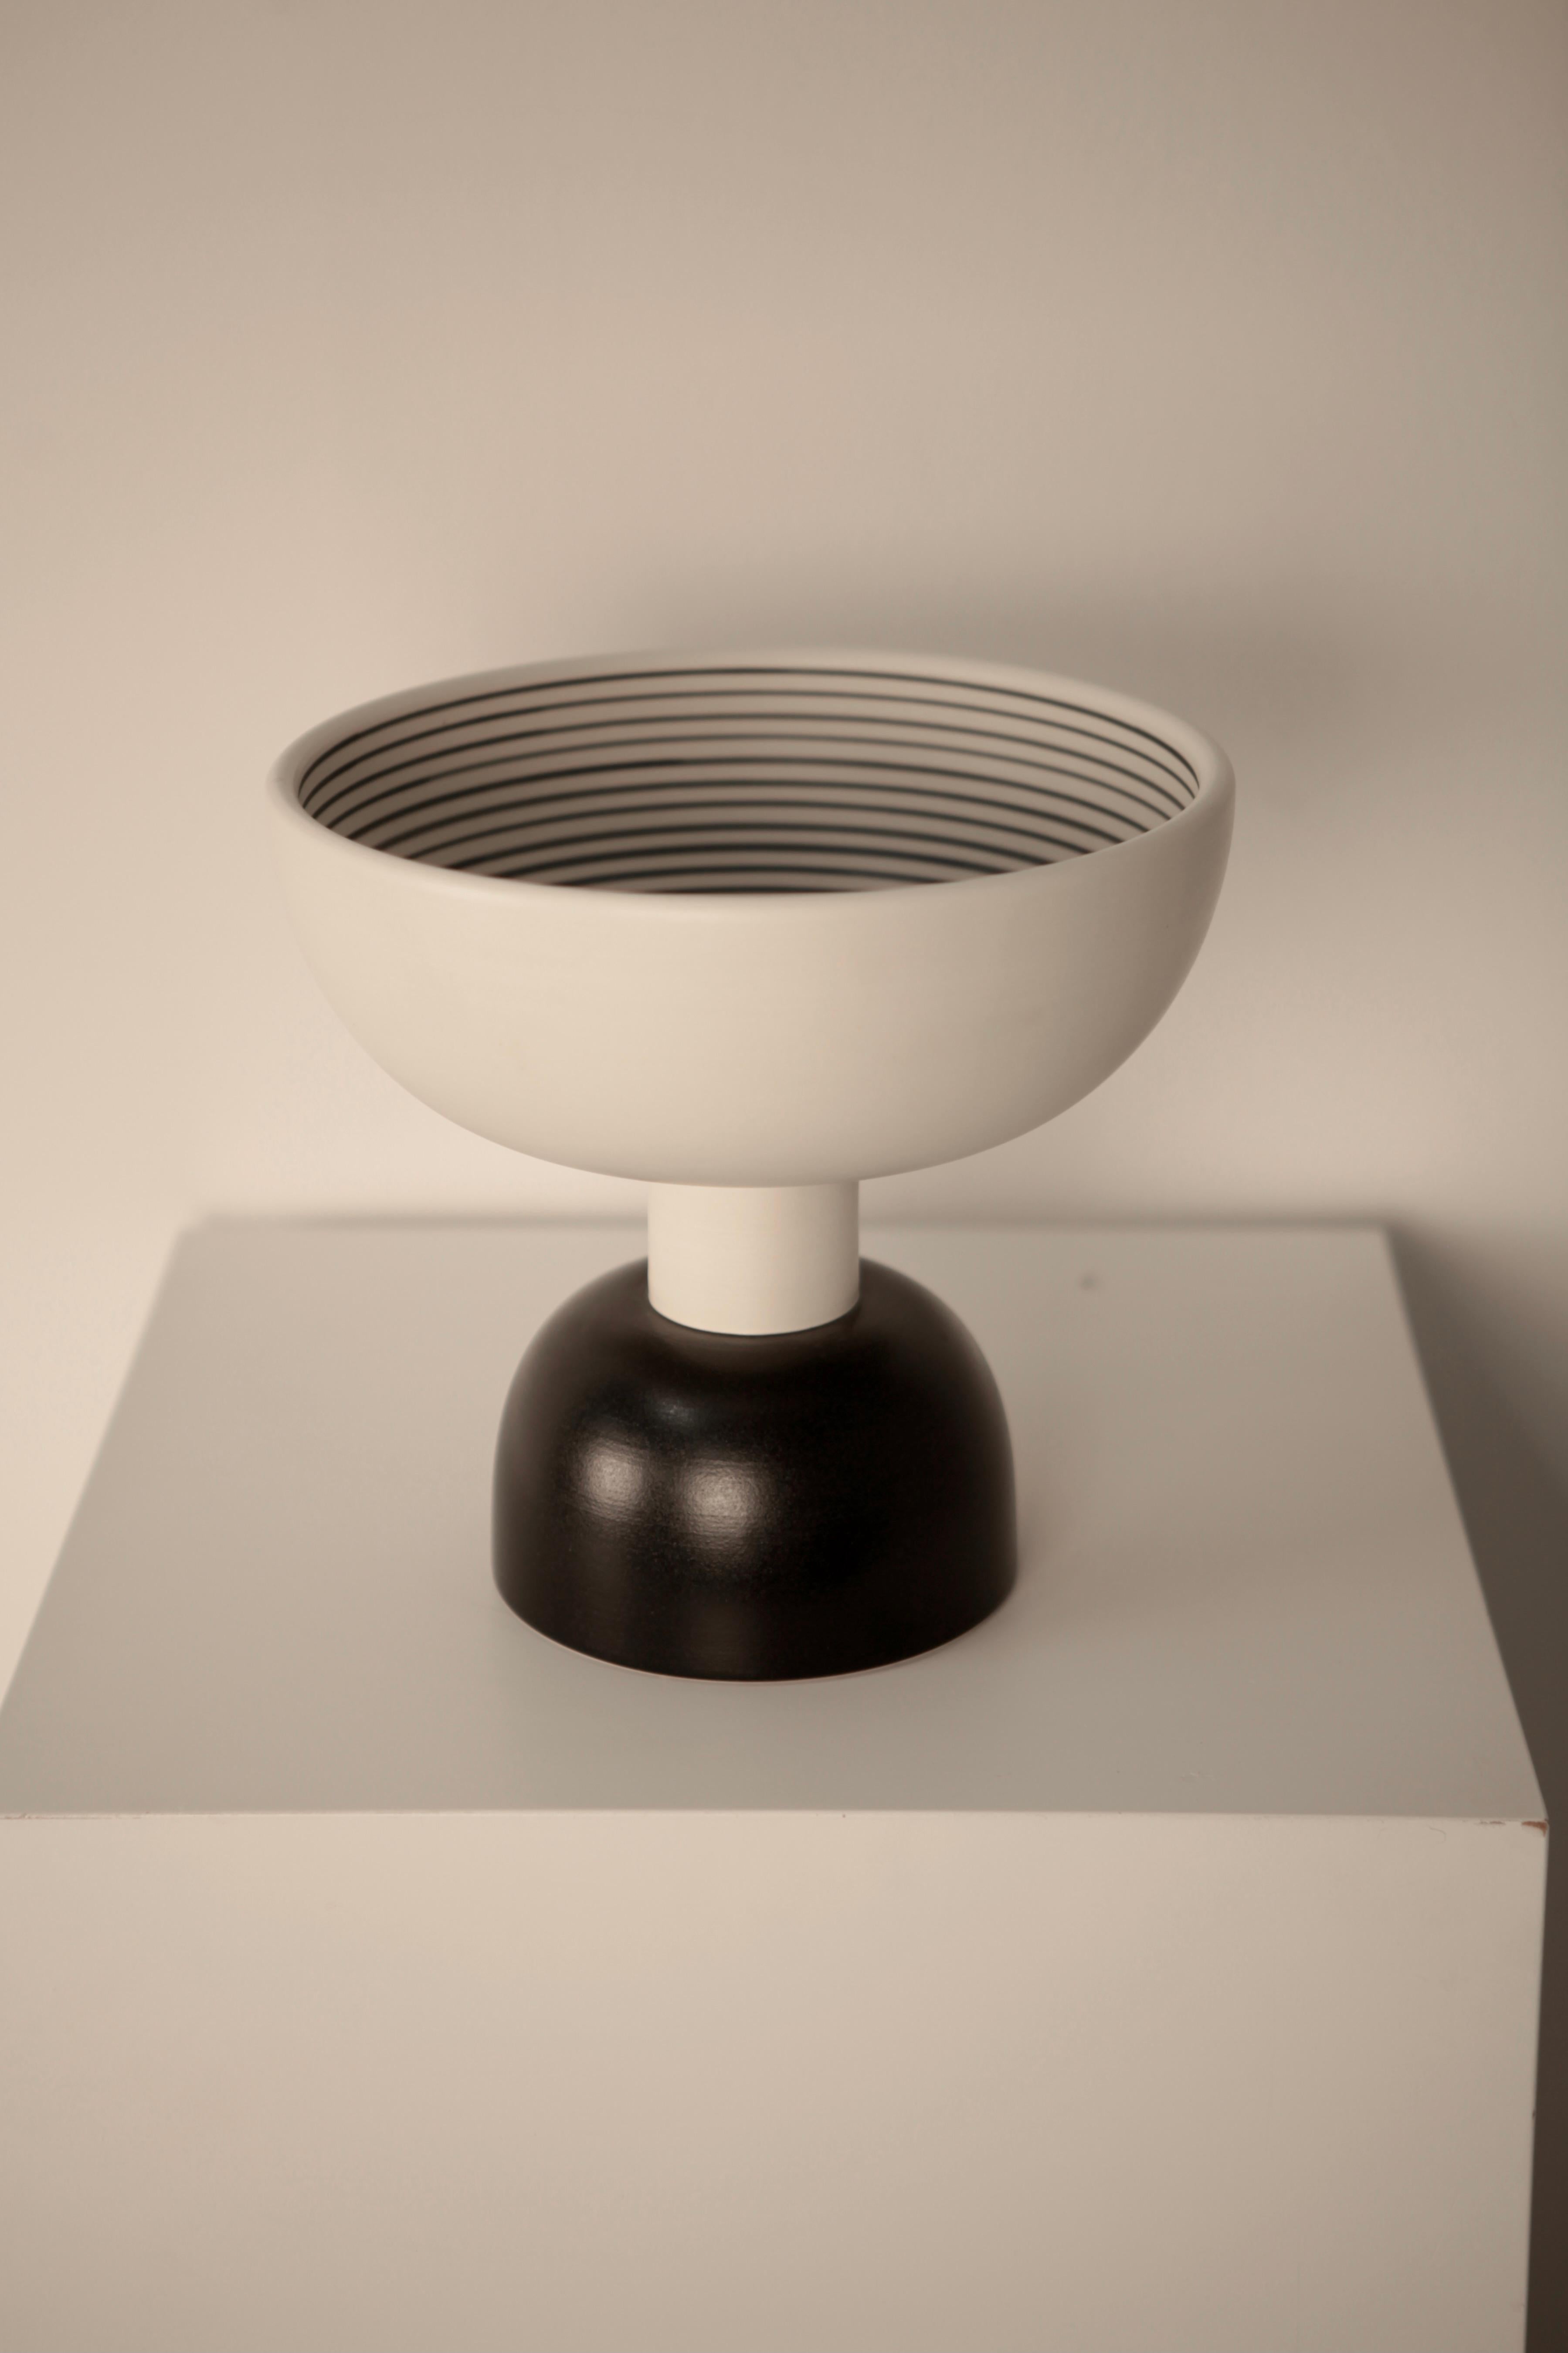 Ettore Sottsass, ceramic bowl from the 'Hollywood Collection`, designed 1968.
Signed: 'Ettore Sottsass, Montelupo, Bitossi'.
No chips or cracks, excellent condition.